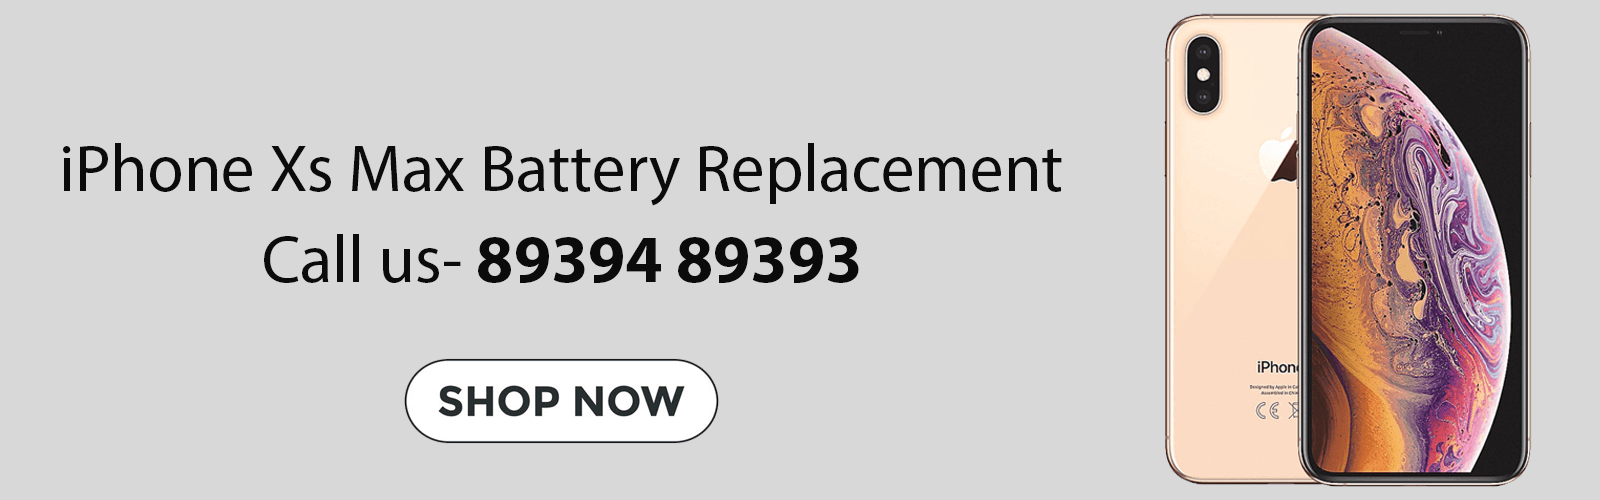 iPhone XS Max Battery Replacement Price Chennai